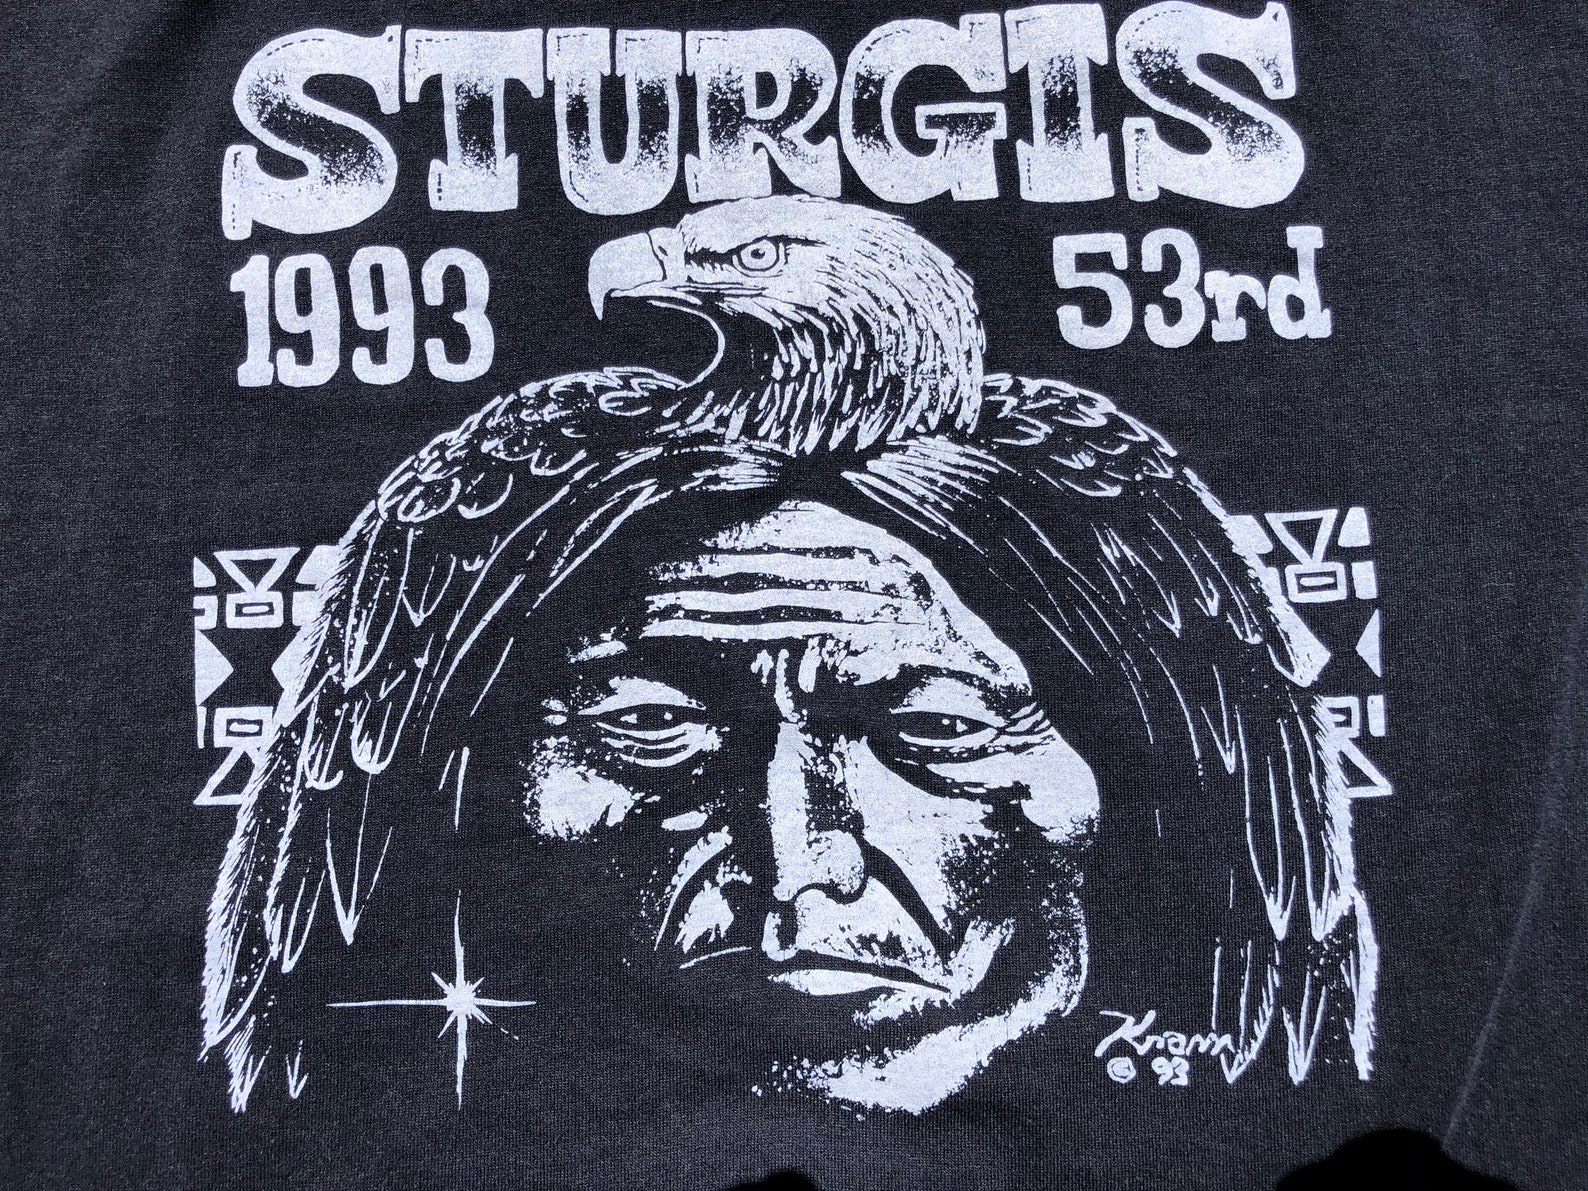 Vintage 1993 Sturgis 53rd Annual Motorcycle Rally Black Hills - Etsy